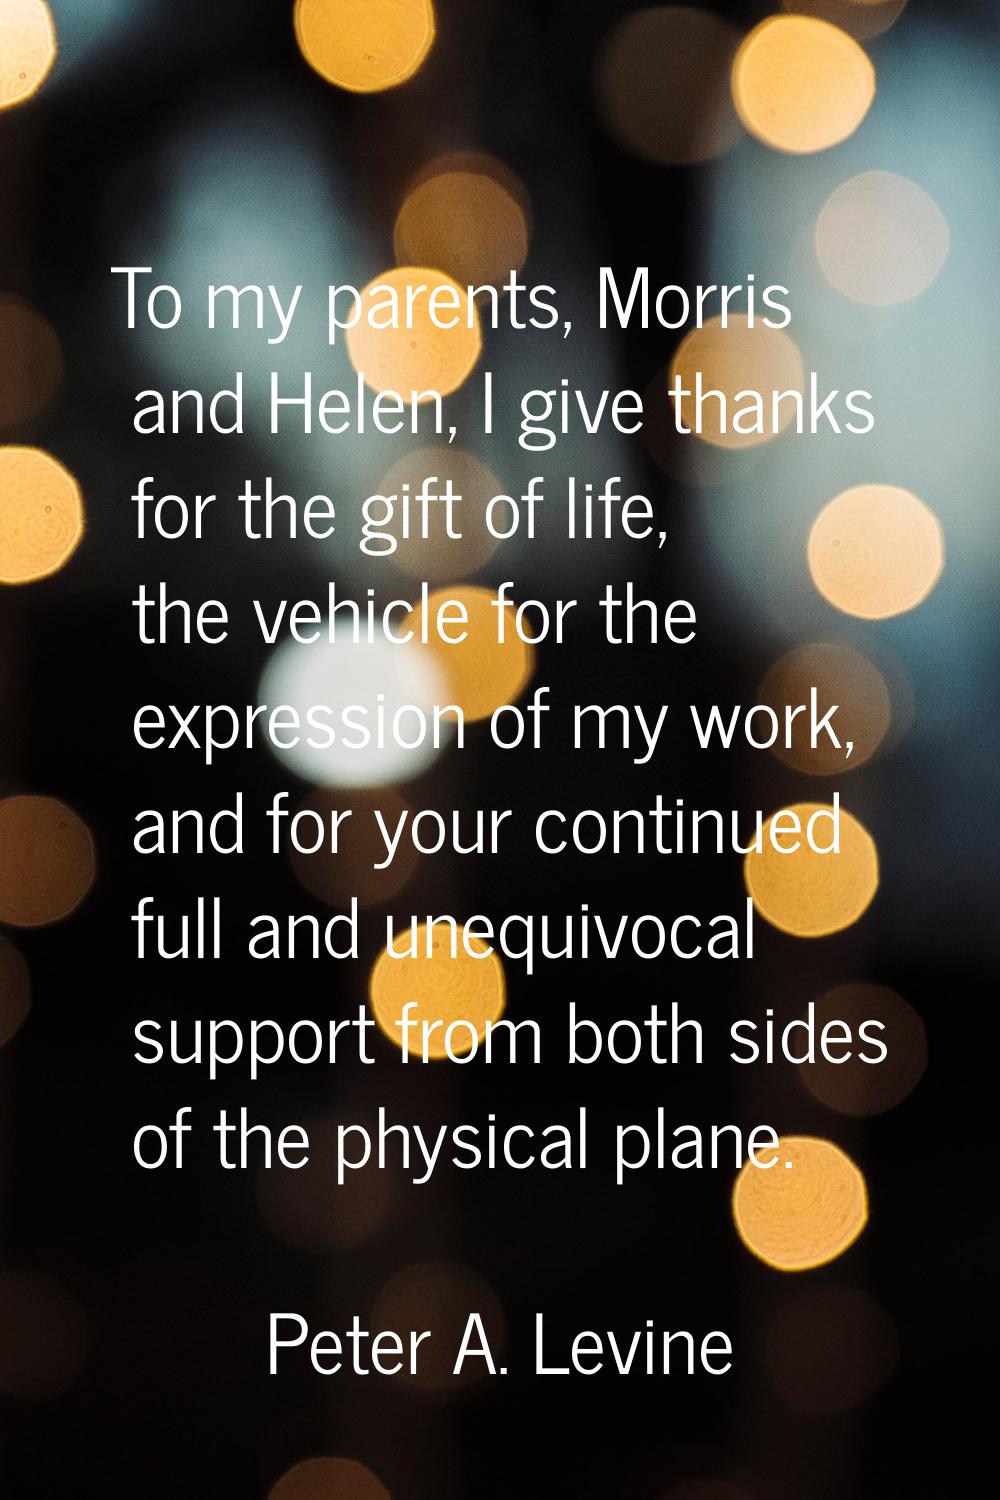 To my parents, Morris and Helen, I give thanks for the gift of life, the vehicle for the expression